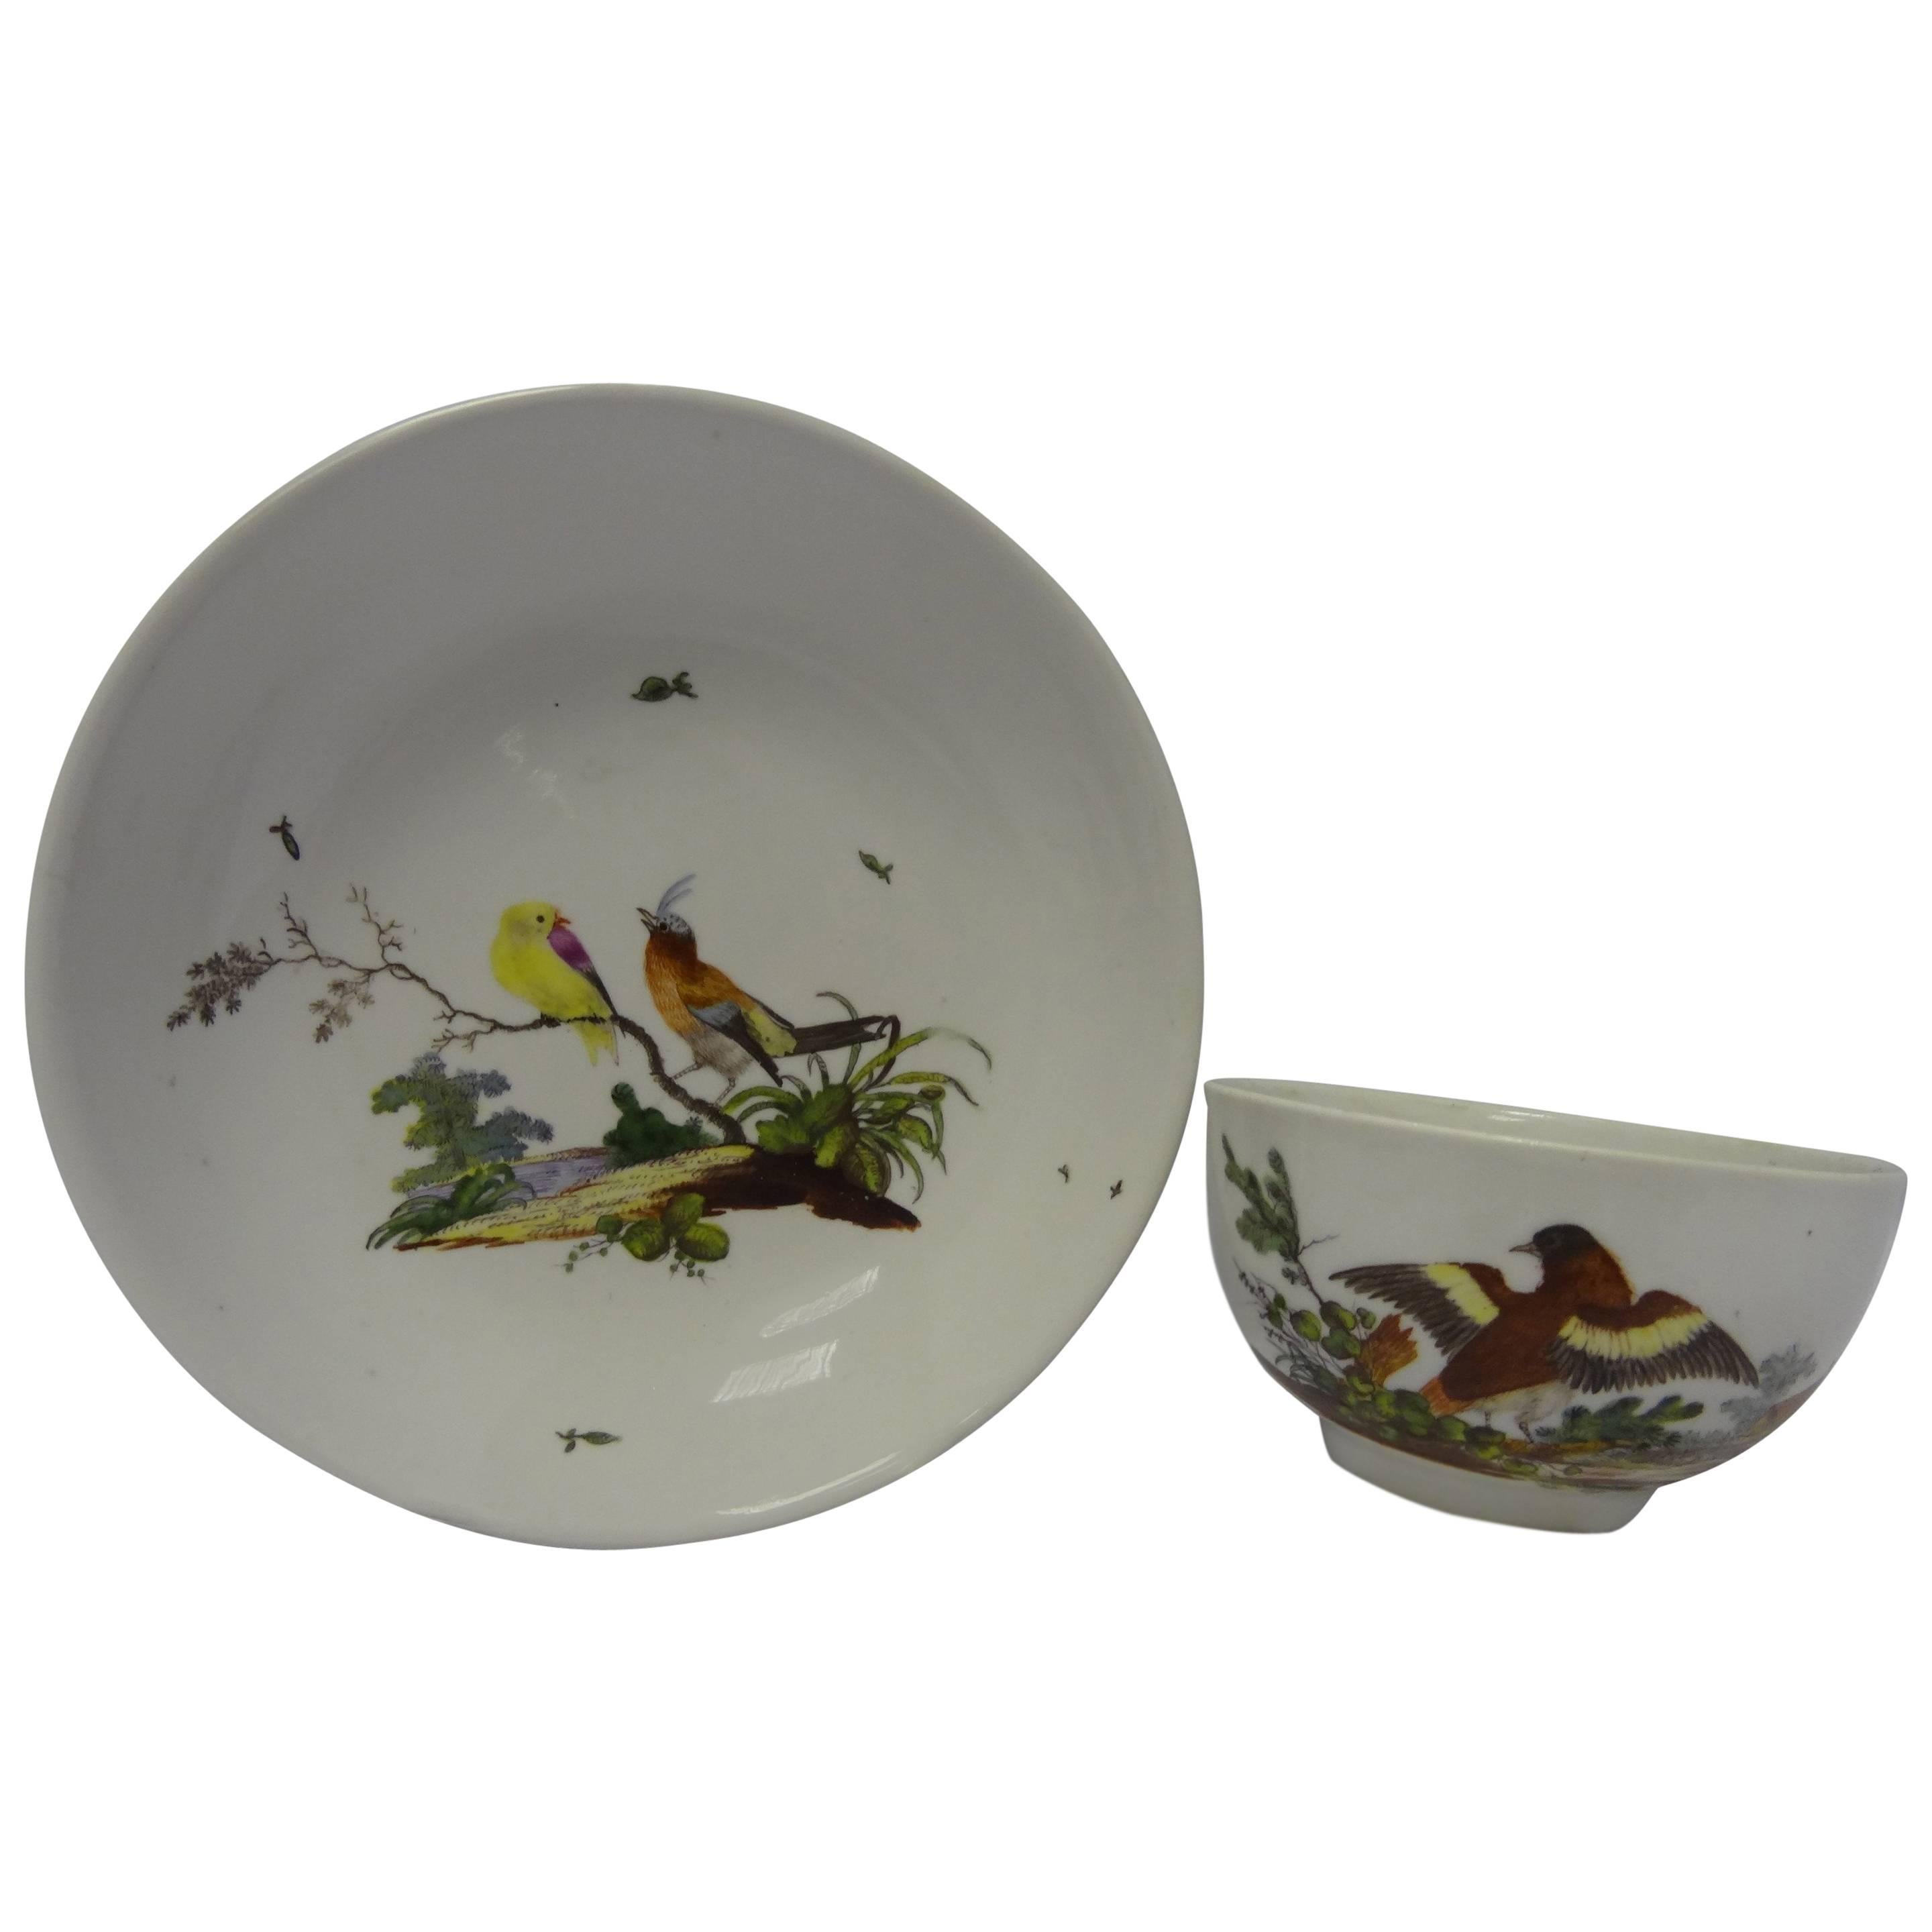 Ansbach Porcelain Cup and Saucer For Sale